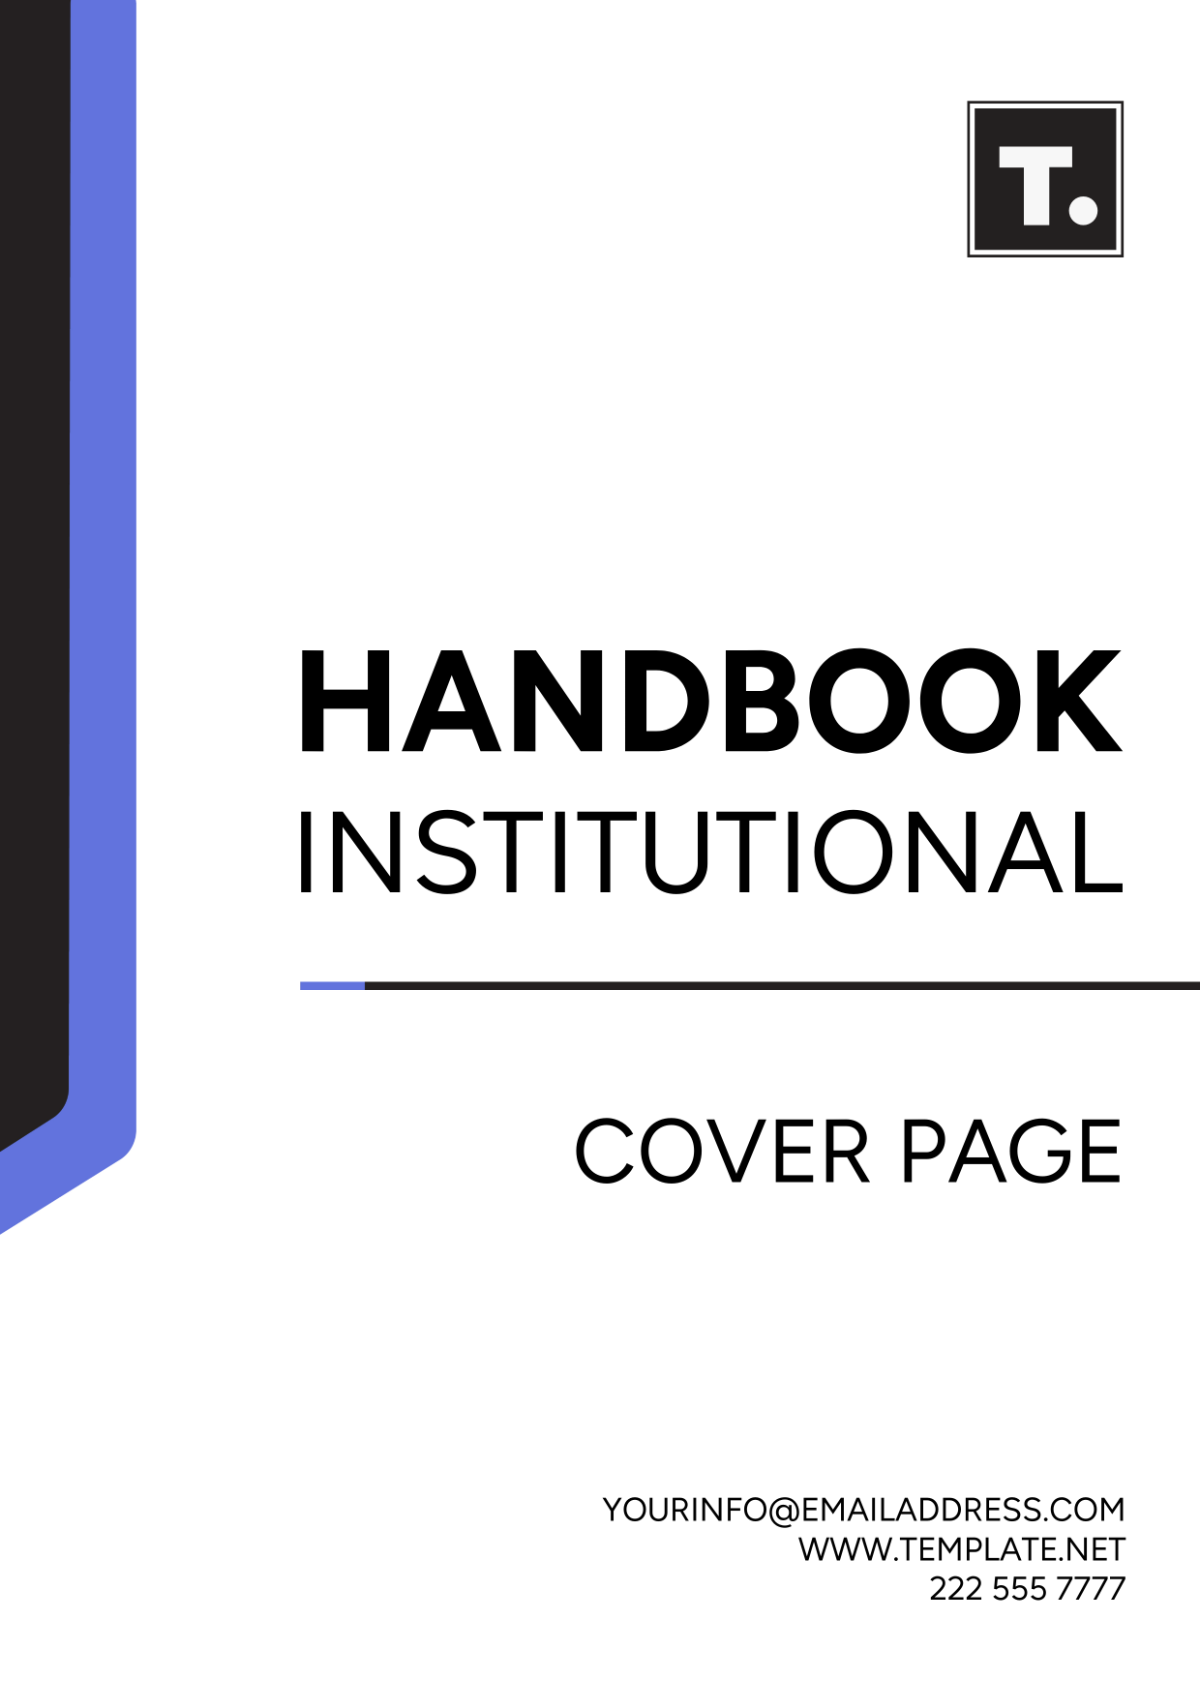 Handbook Institutional Cover Page Template